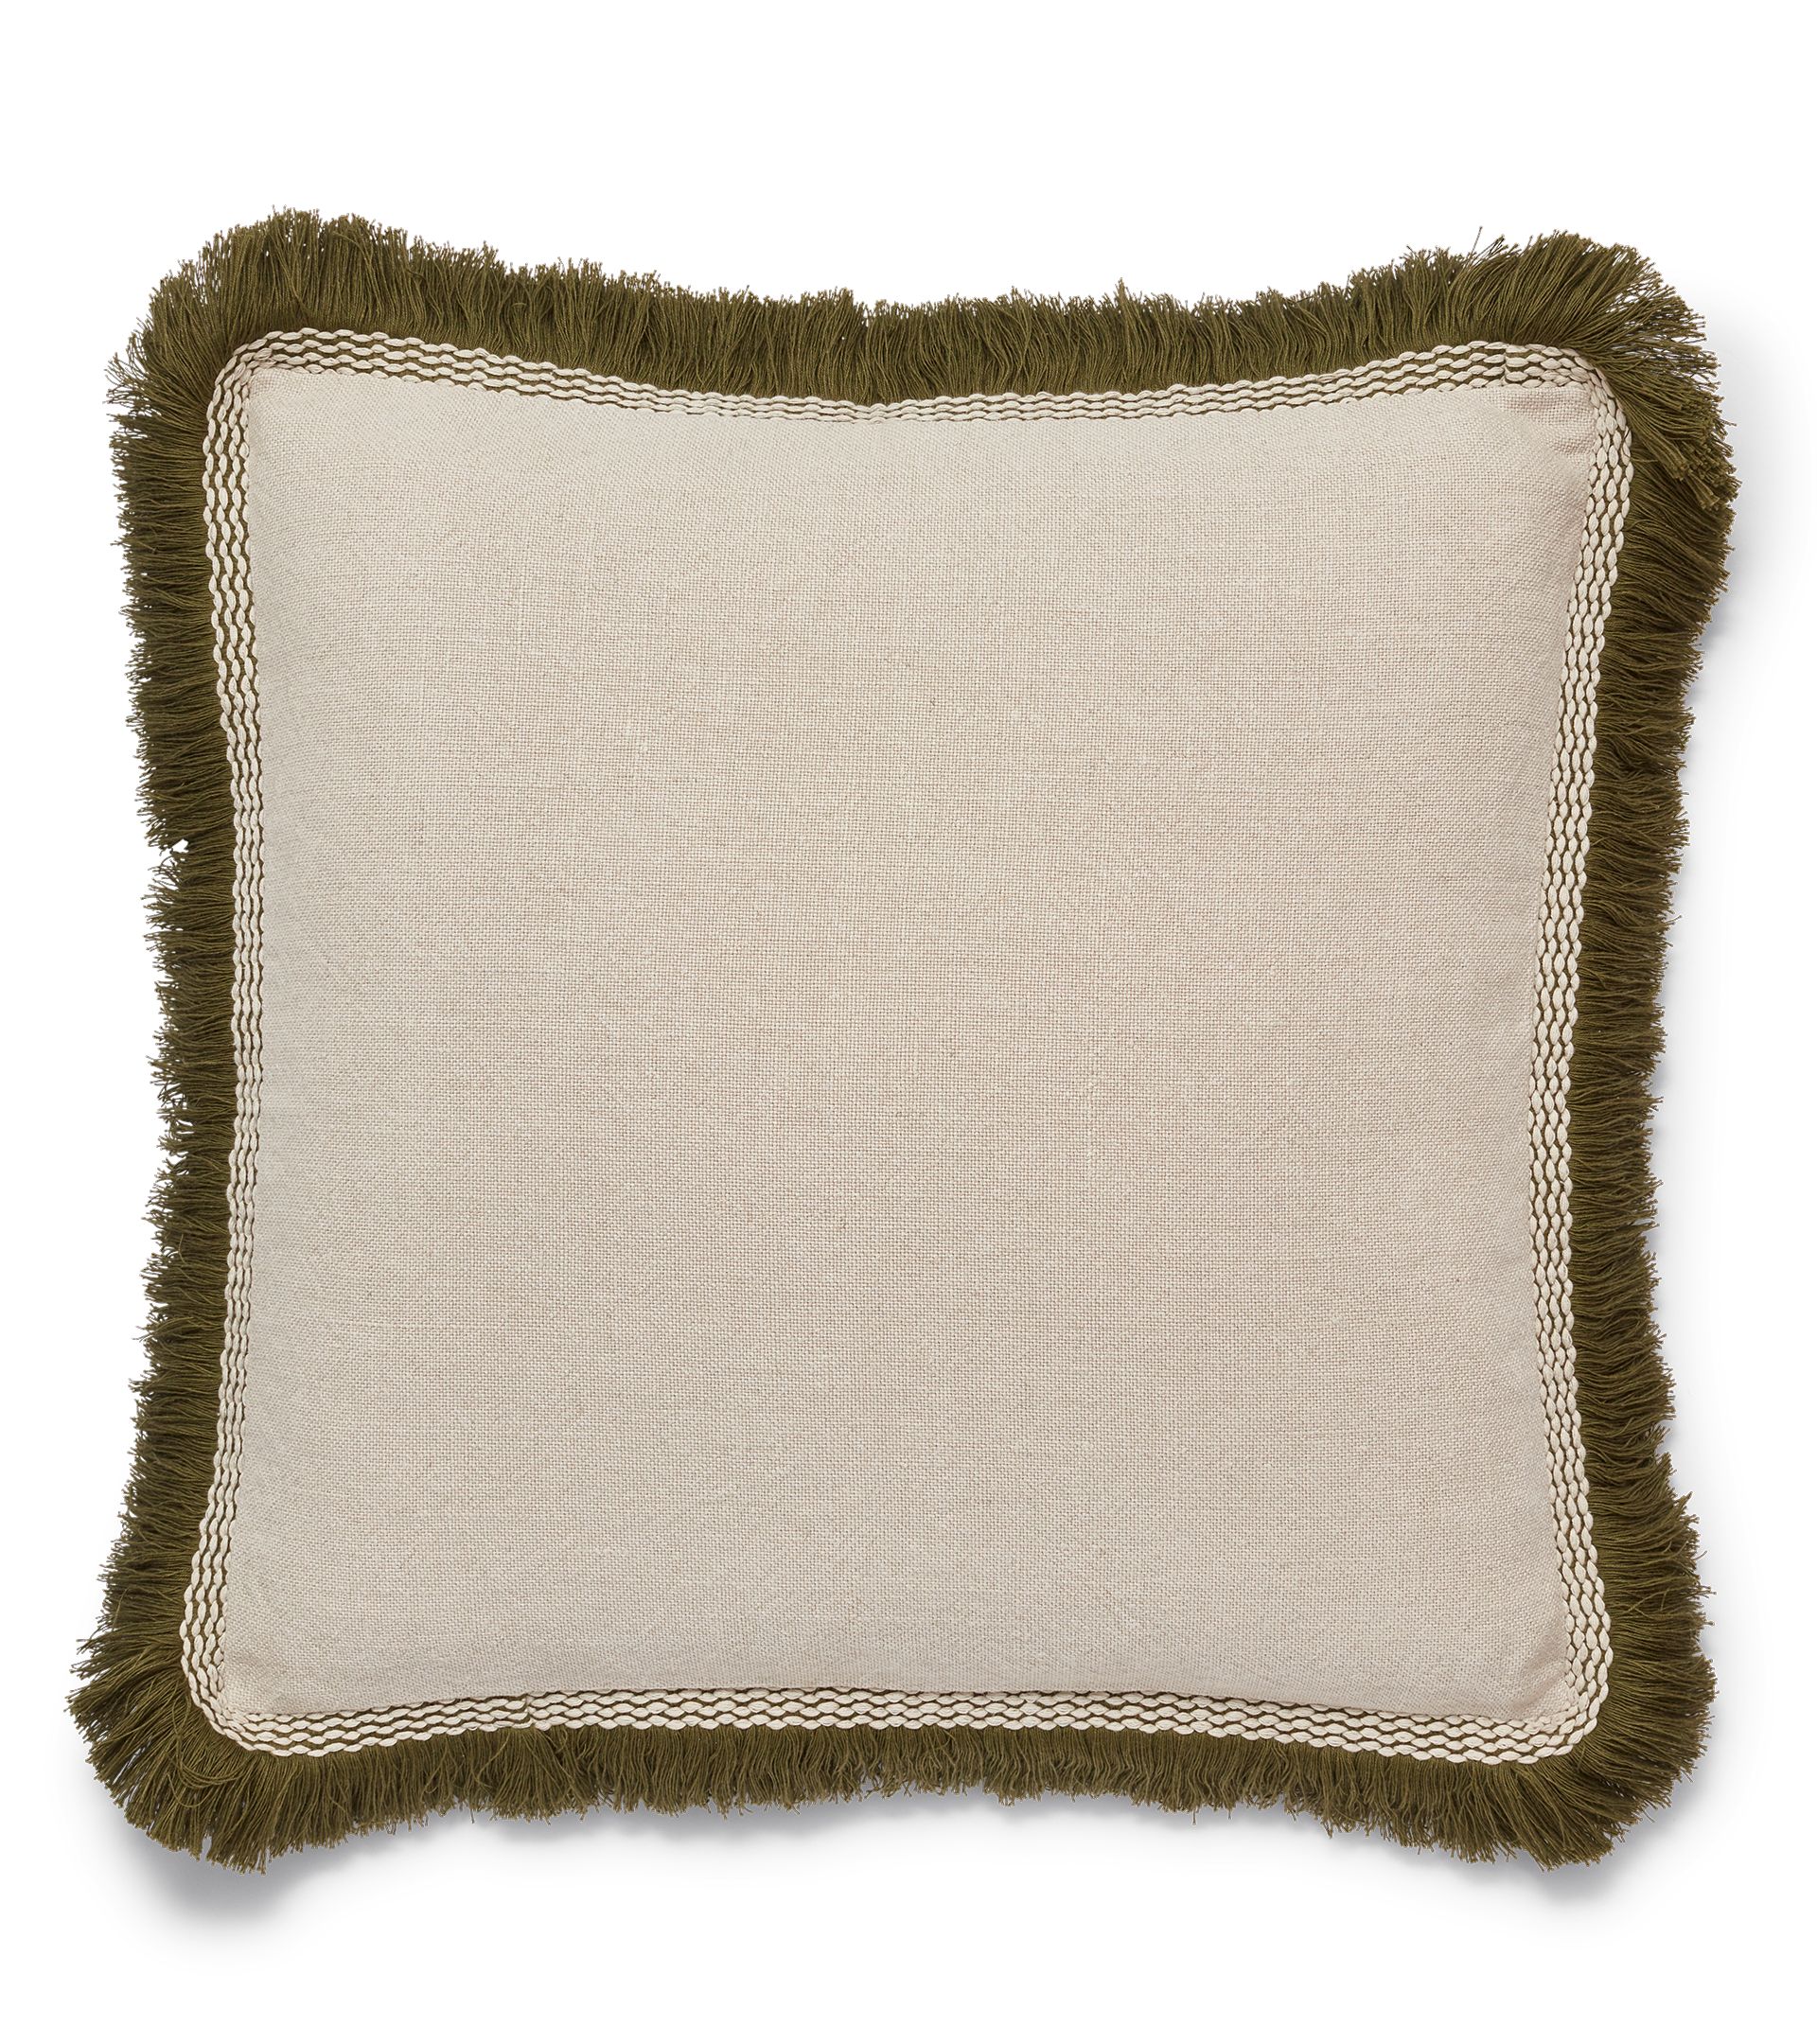 Elspeth Pillow Cover with Fringing - Natural/Green | OKA US